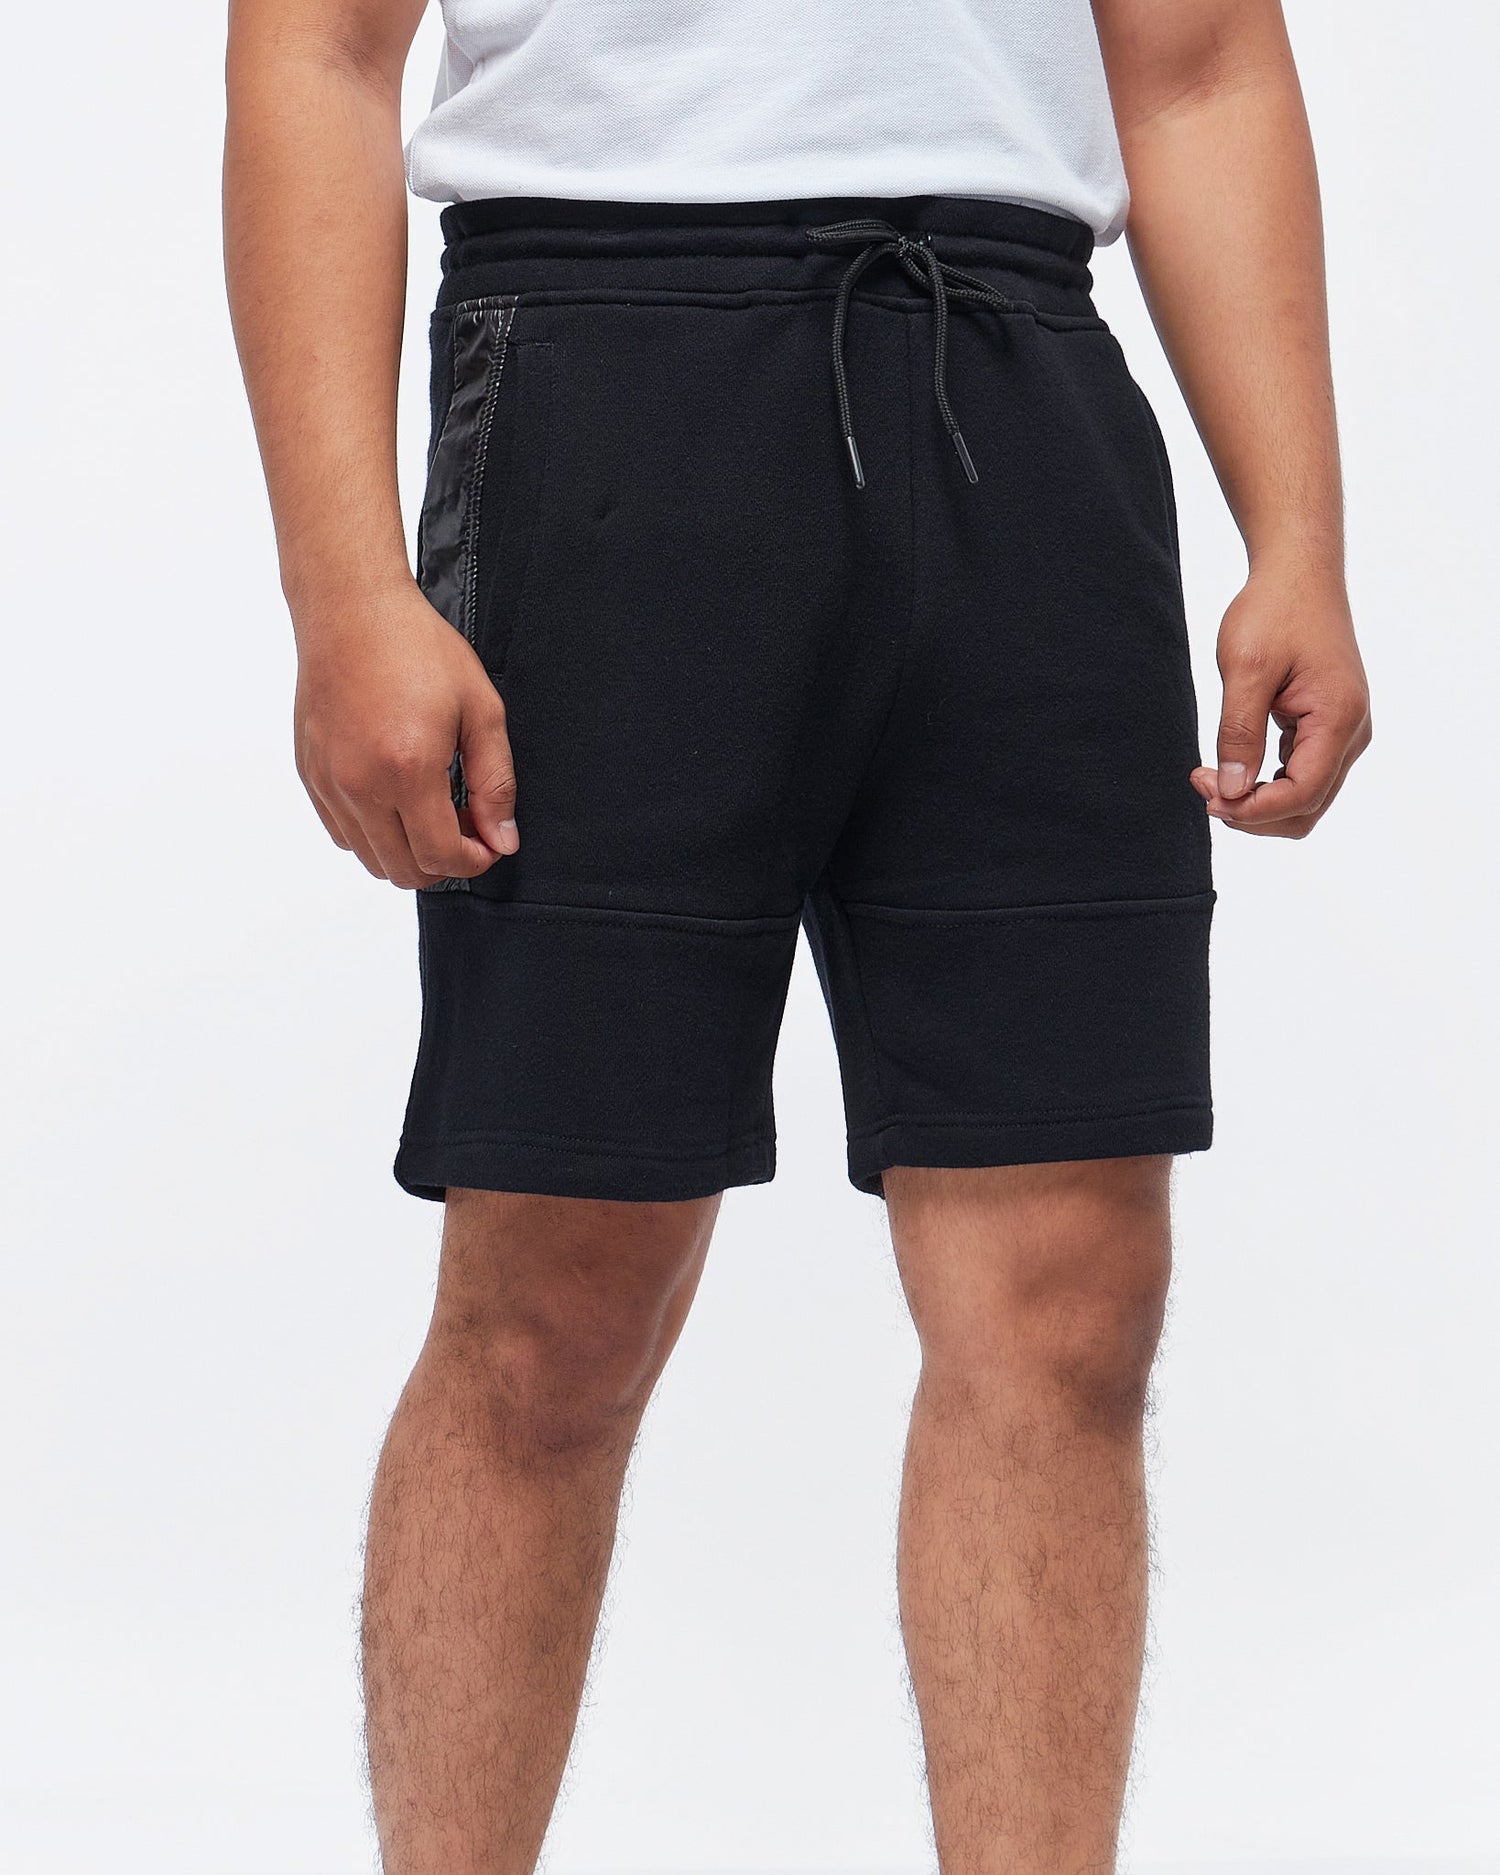 MOI OUTFIT-Leather Side Striped Men Shorts 15.90